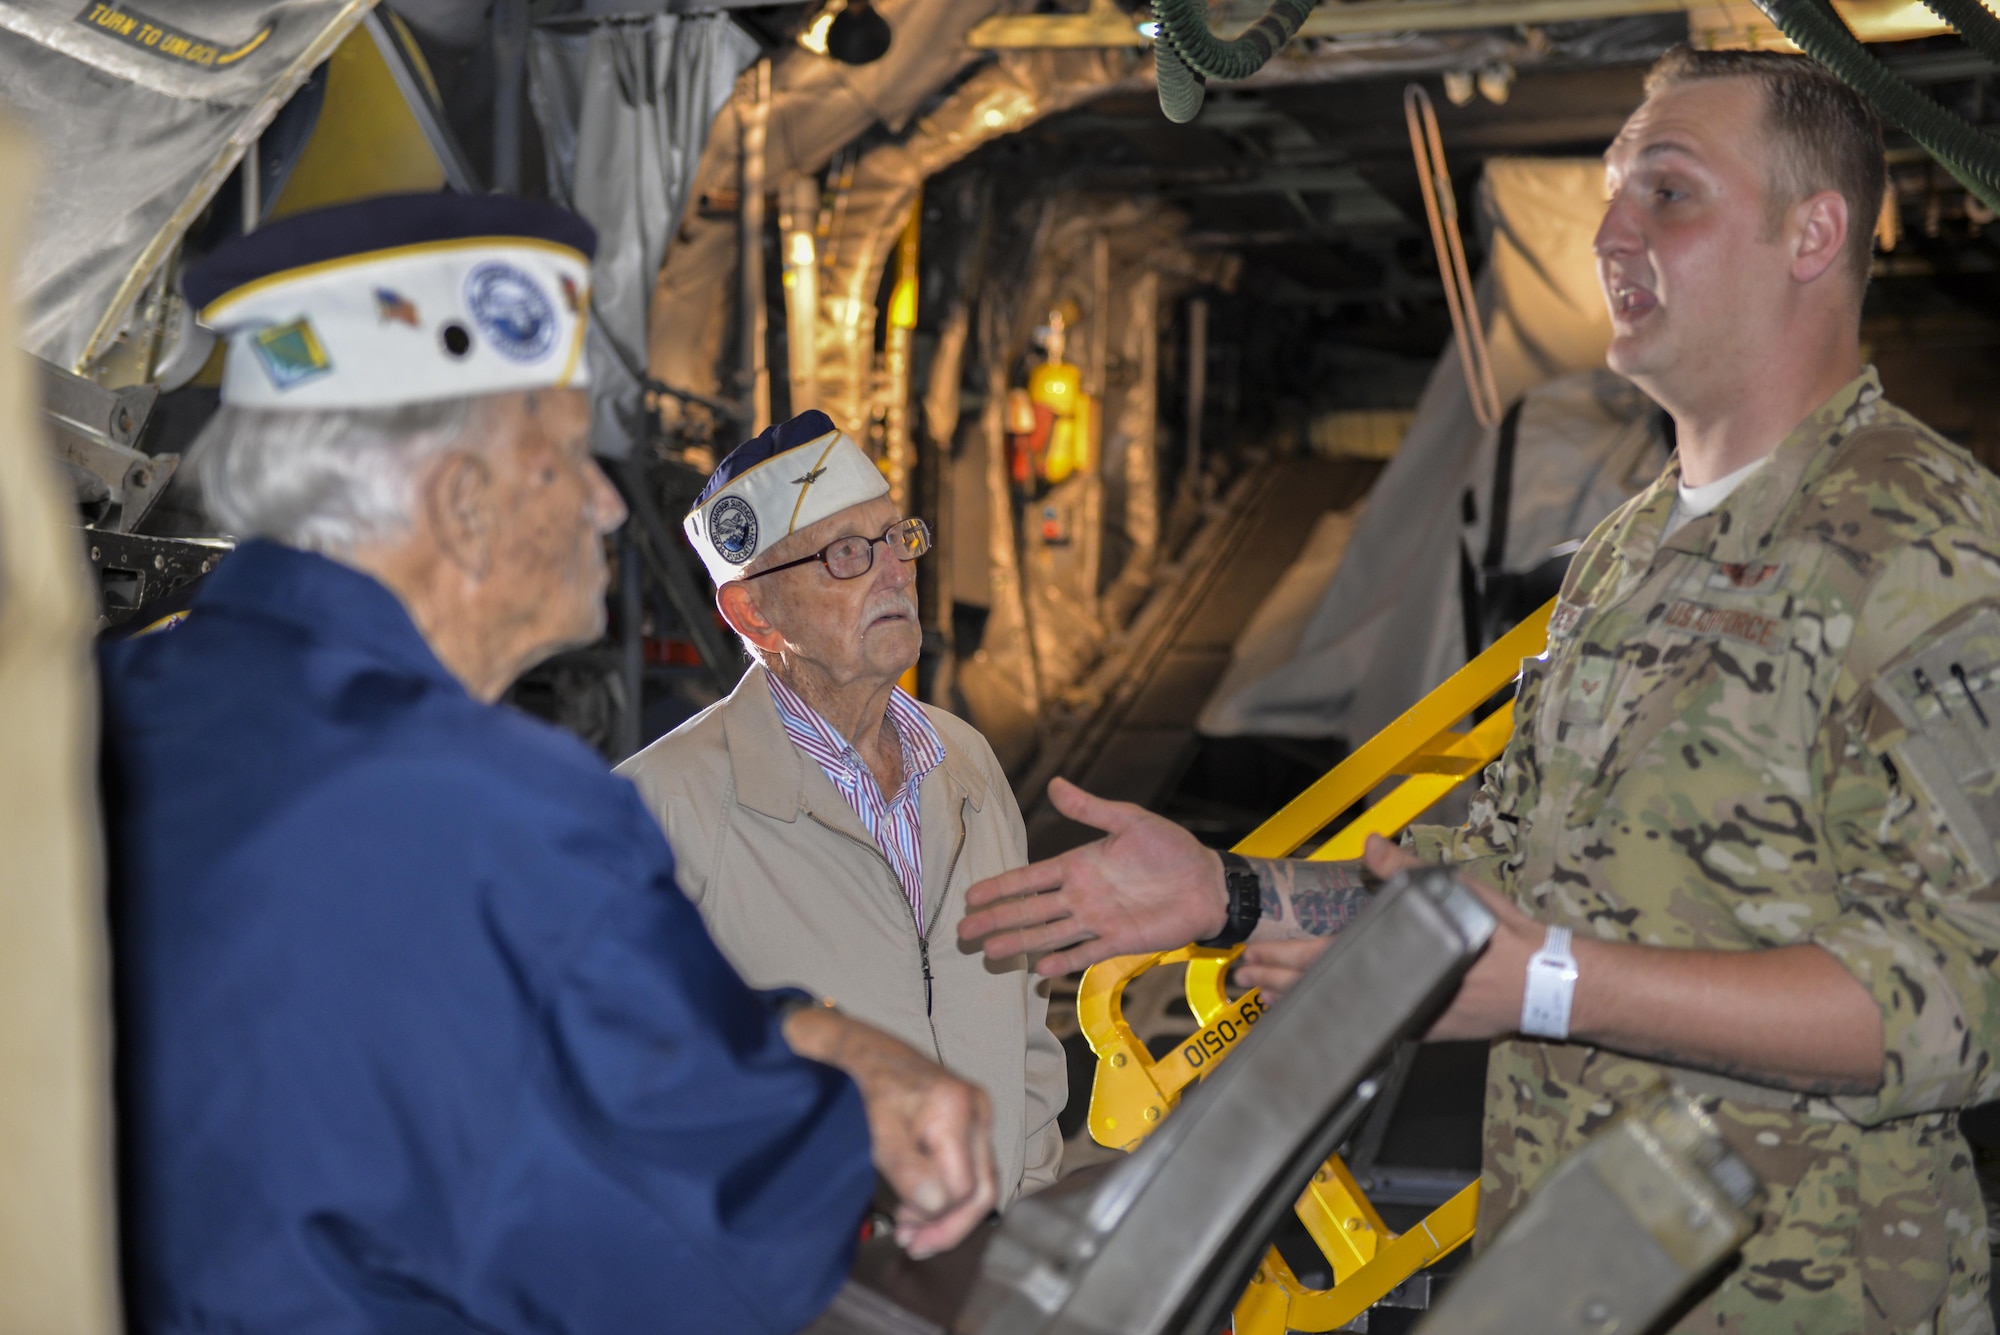 U.S. Air Force Senior Airman Jake Peters, a special missions aviator sensor operator with the 4th Special Operations Squadron, speaks with retired U.S. Marine Sgt. Maj. Bill Braddock, left, and retired U.S. Navy Lt. Cmdr. Cass Phillips, middle, Pearl Harbor survivors, during a tour of an AC-130U Spooky Gunship at Hurlburt Field, Fla., April 5, 2016. During a base tour, Braddock, Phillips and two fellow Pearl Harbor survivors spent time with Air Commandos to discuss their experiences and the differences they see in today’s force. (U.S. Air Force photo by 2nd Lt. Jaclyn Pienkowski)